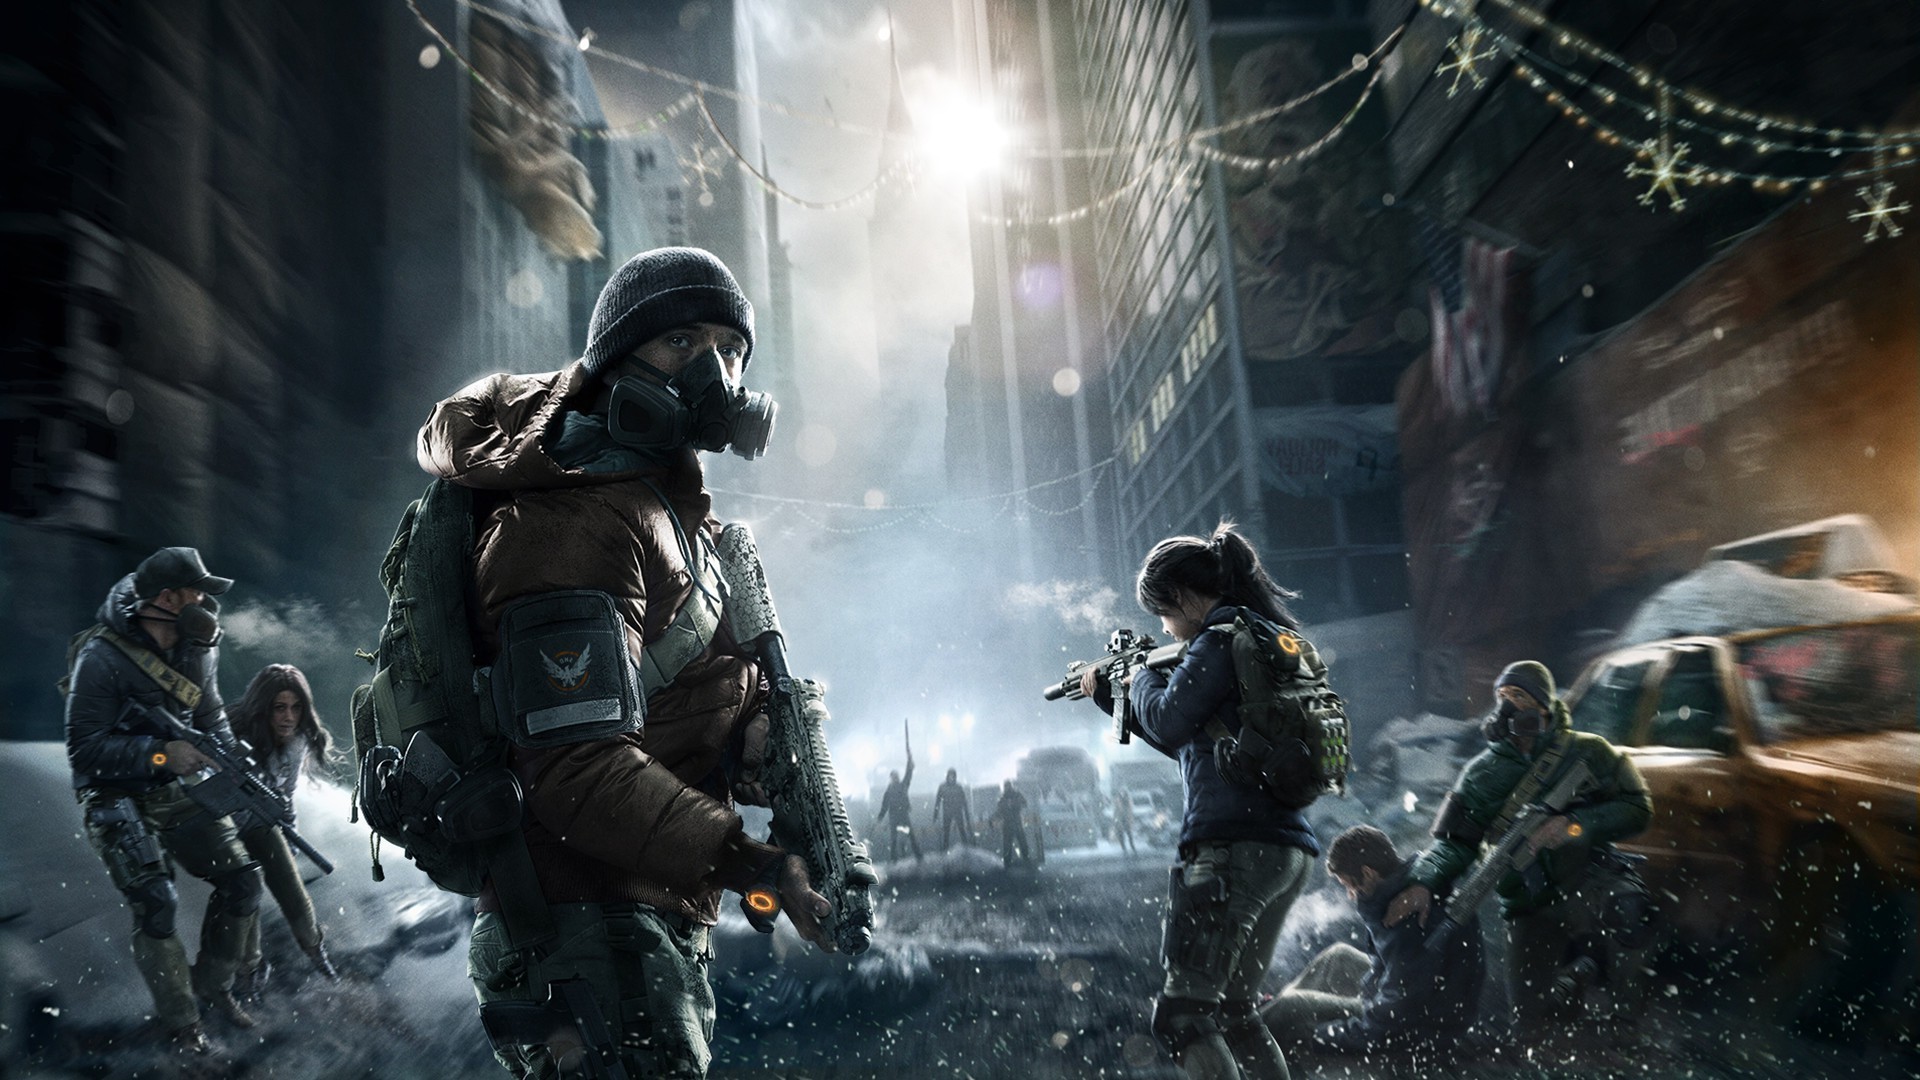 Tom Clancys The Division, Tom Clancys, Video Games - Tom Clancy's The Division - HD Wallpaper 